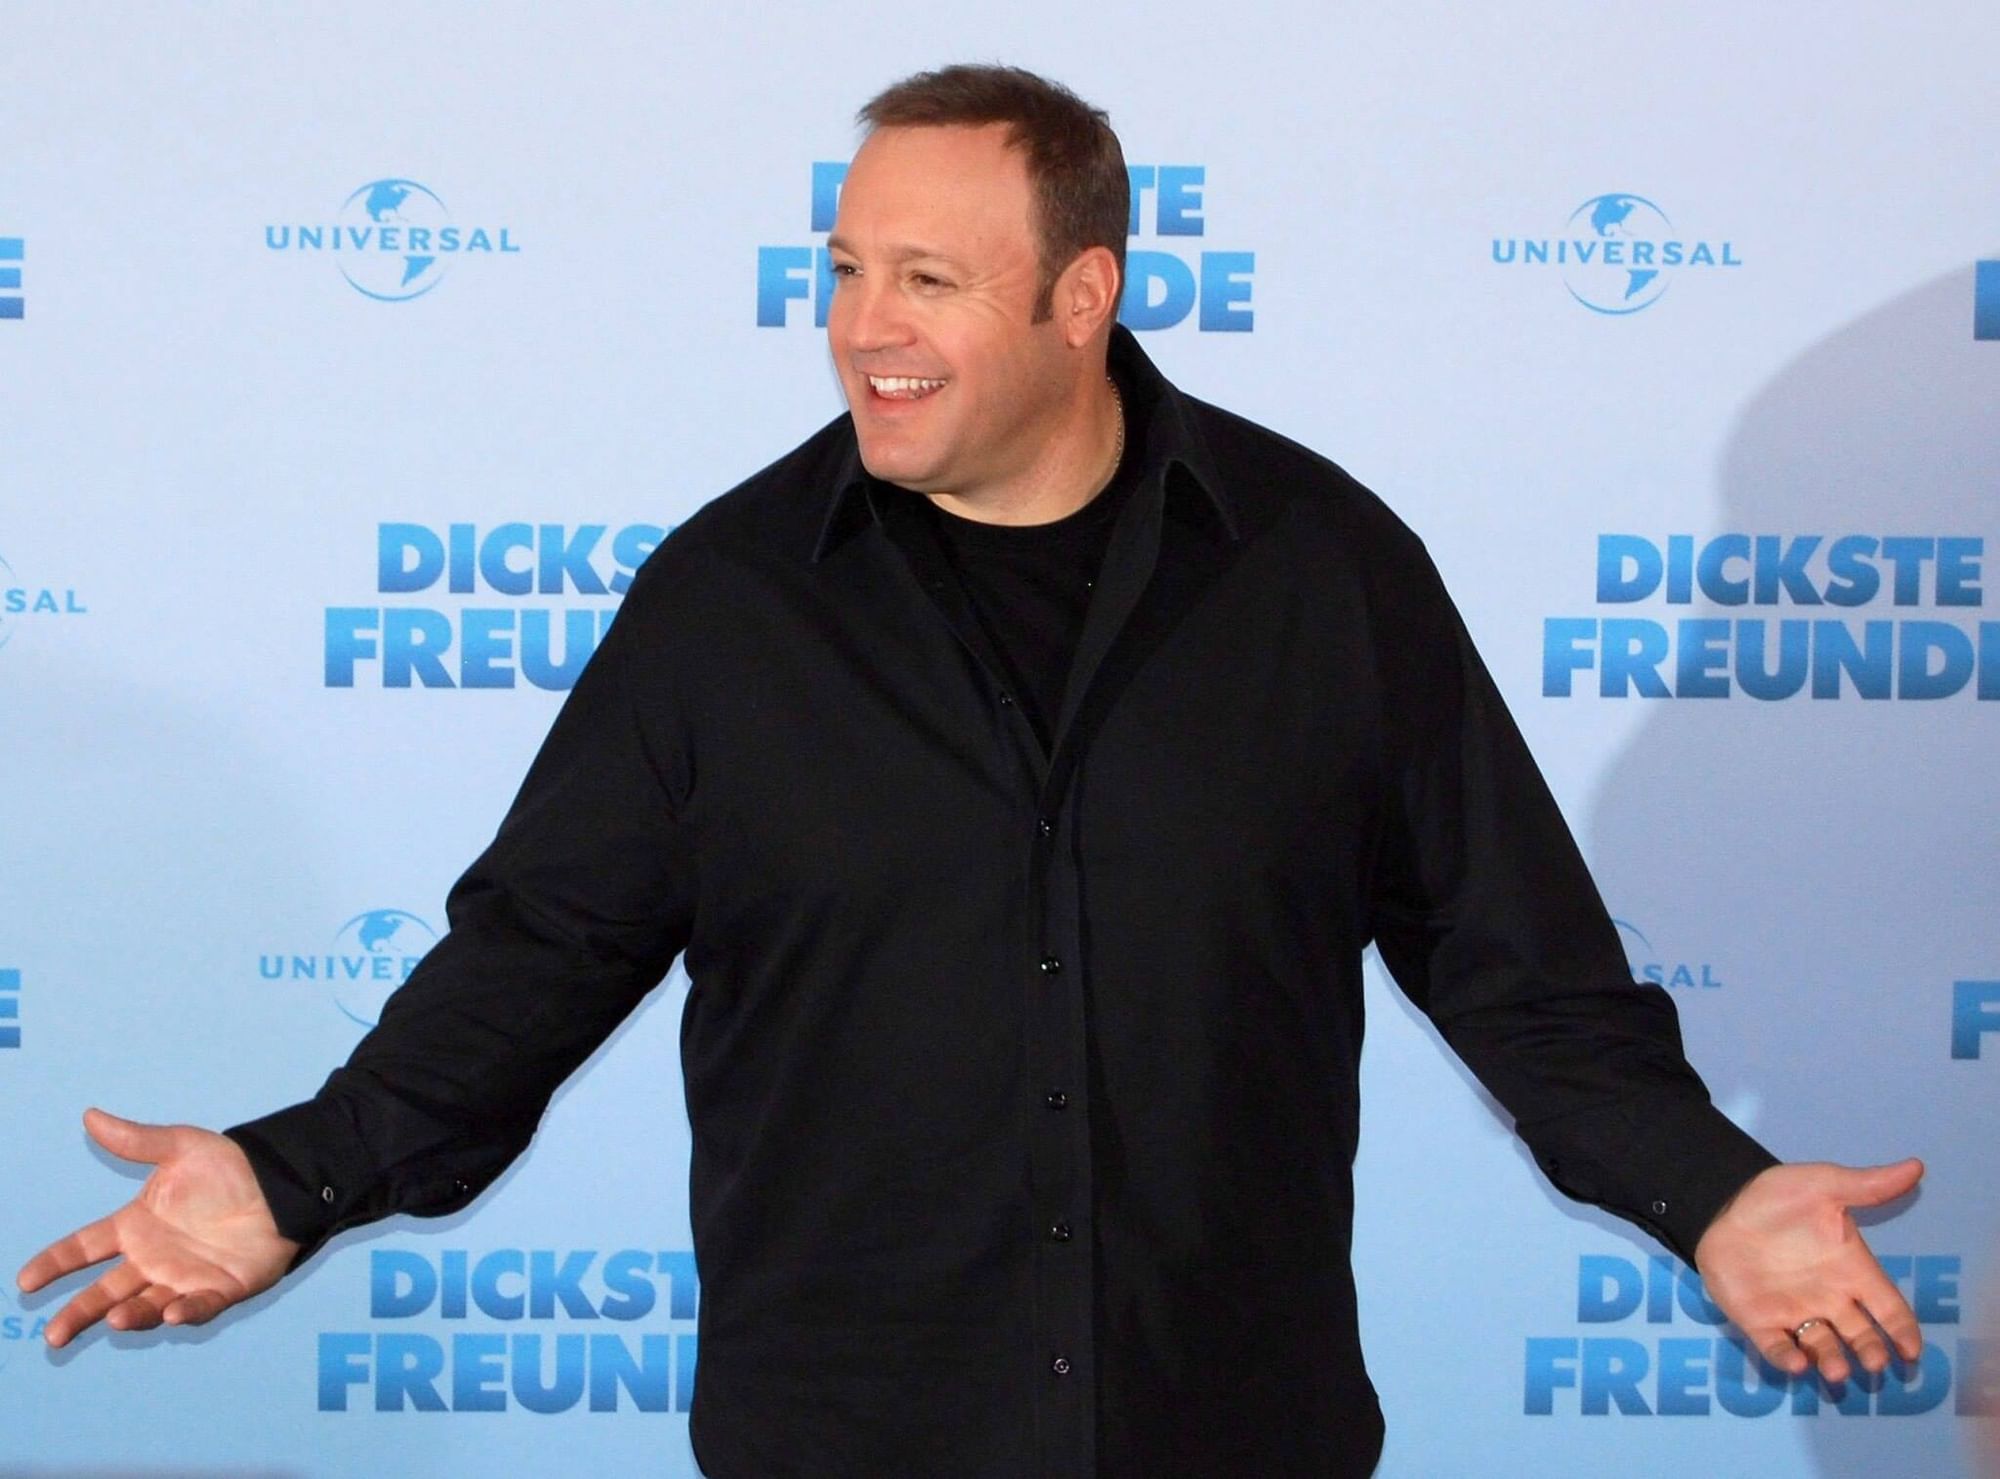 Kevin James at a video premiere in Berlin, Germany.